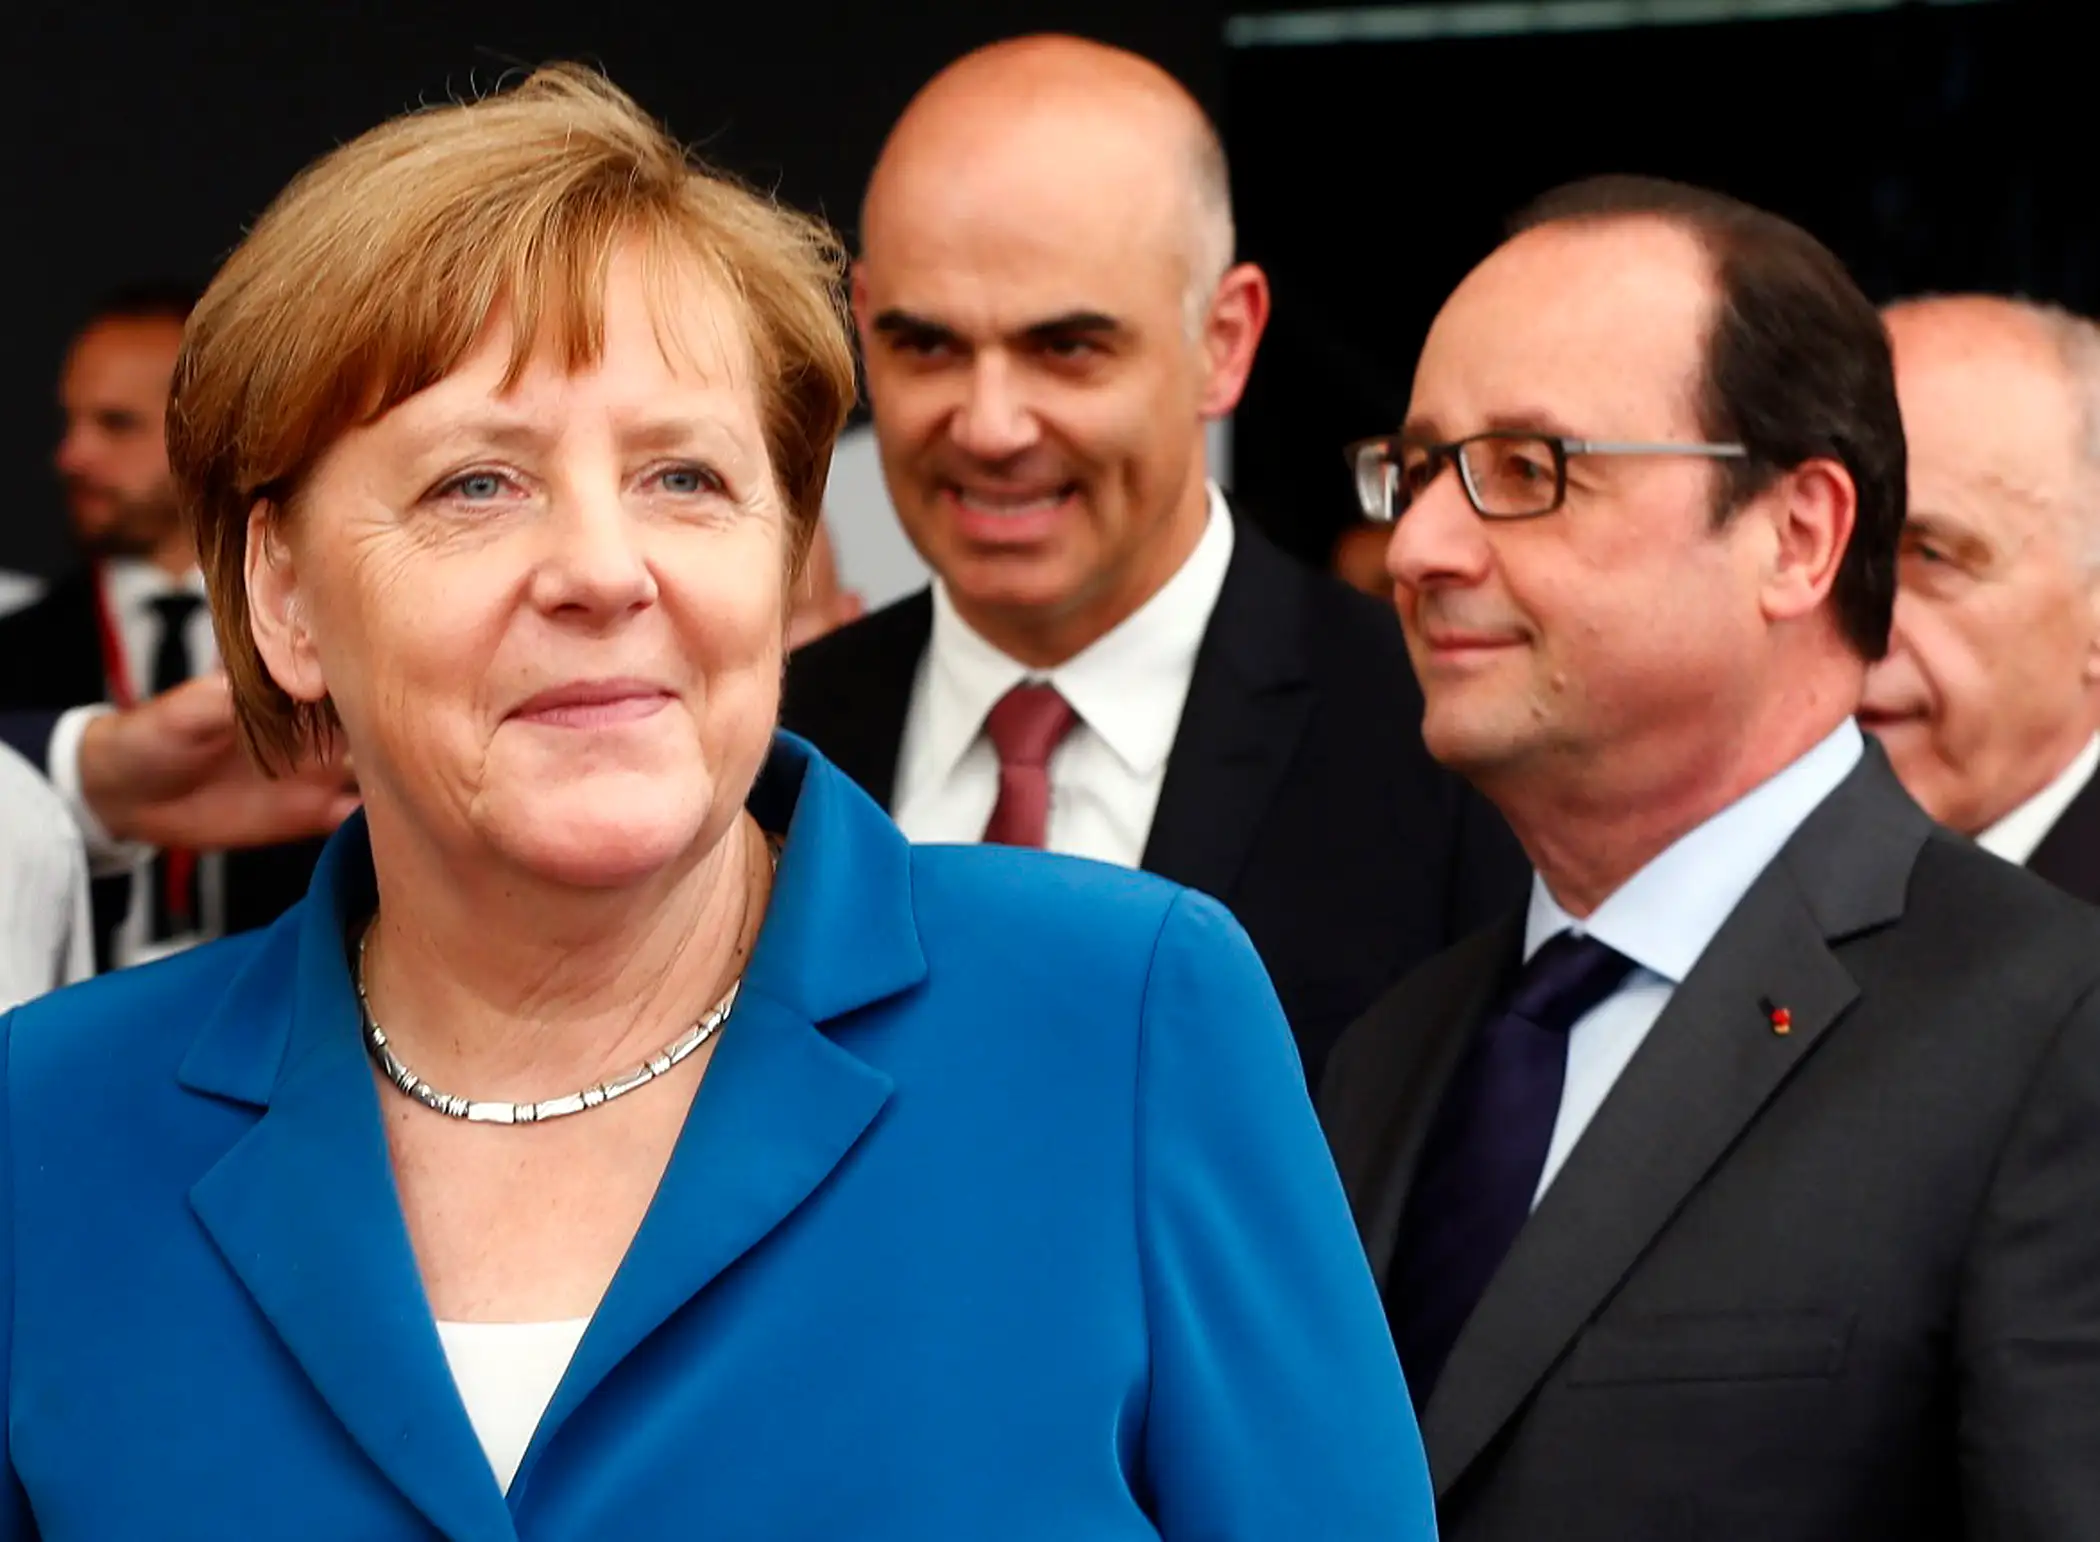 (L-R) German Chancellor Angela Merkel, Swiss Interior Minister Alain Berset and French President Francois Hollande arrive in Pollegio for the opening ceremony of the NEAT Gotthard Base Tunnel, the world's longest and deepest rail tunnel, Switzerland June 1, 2016.